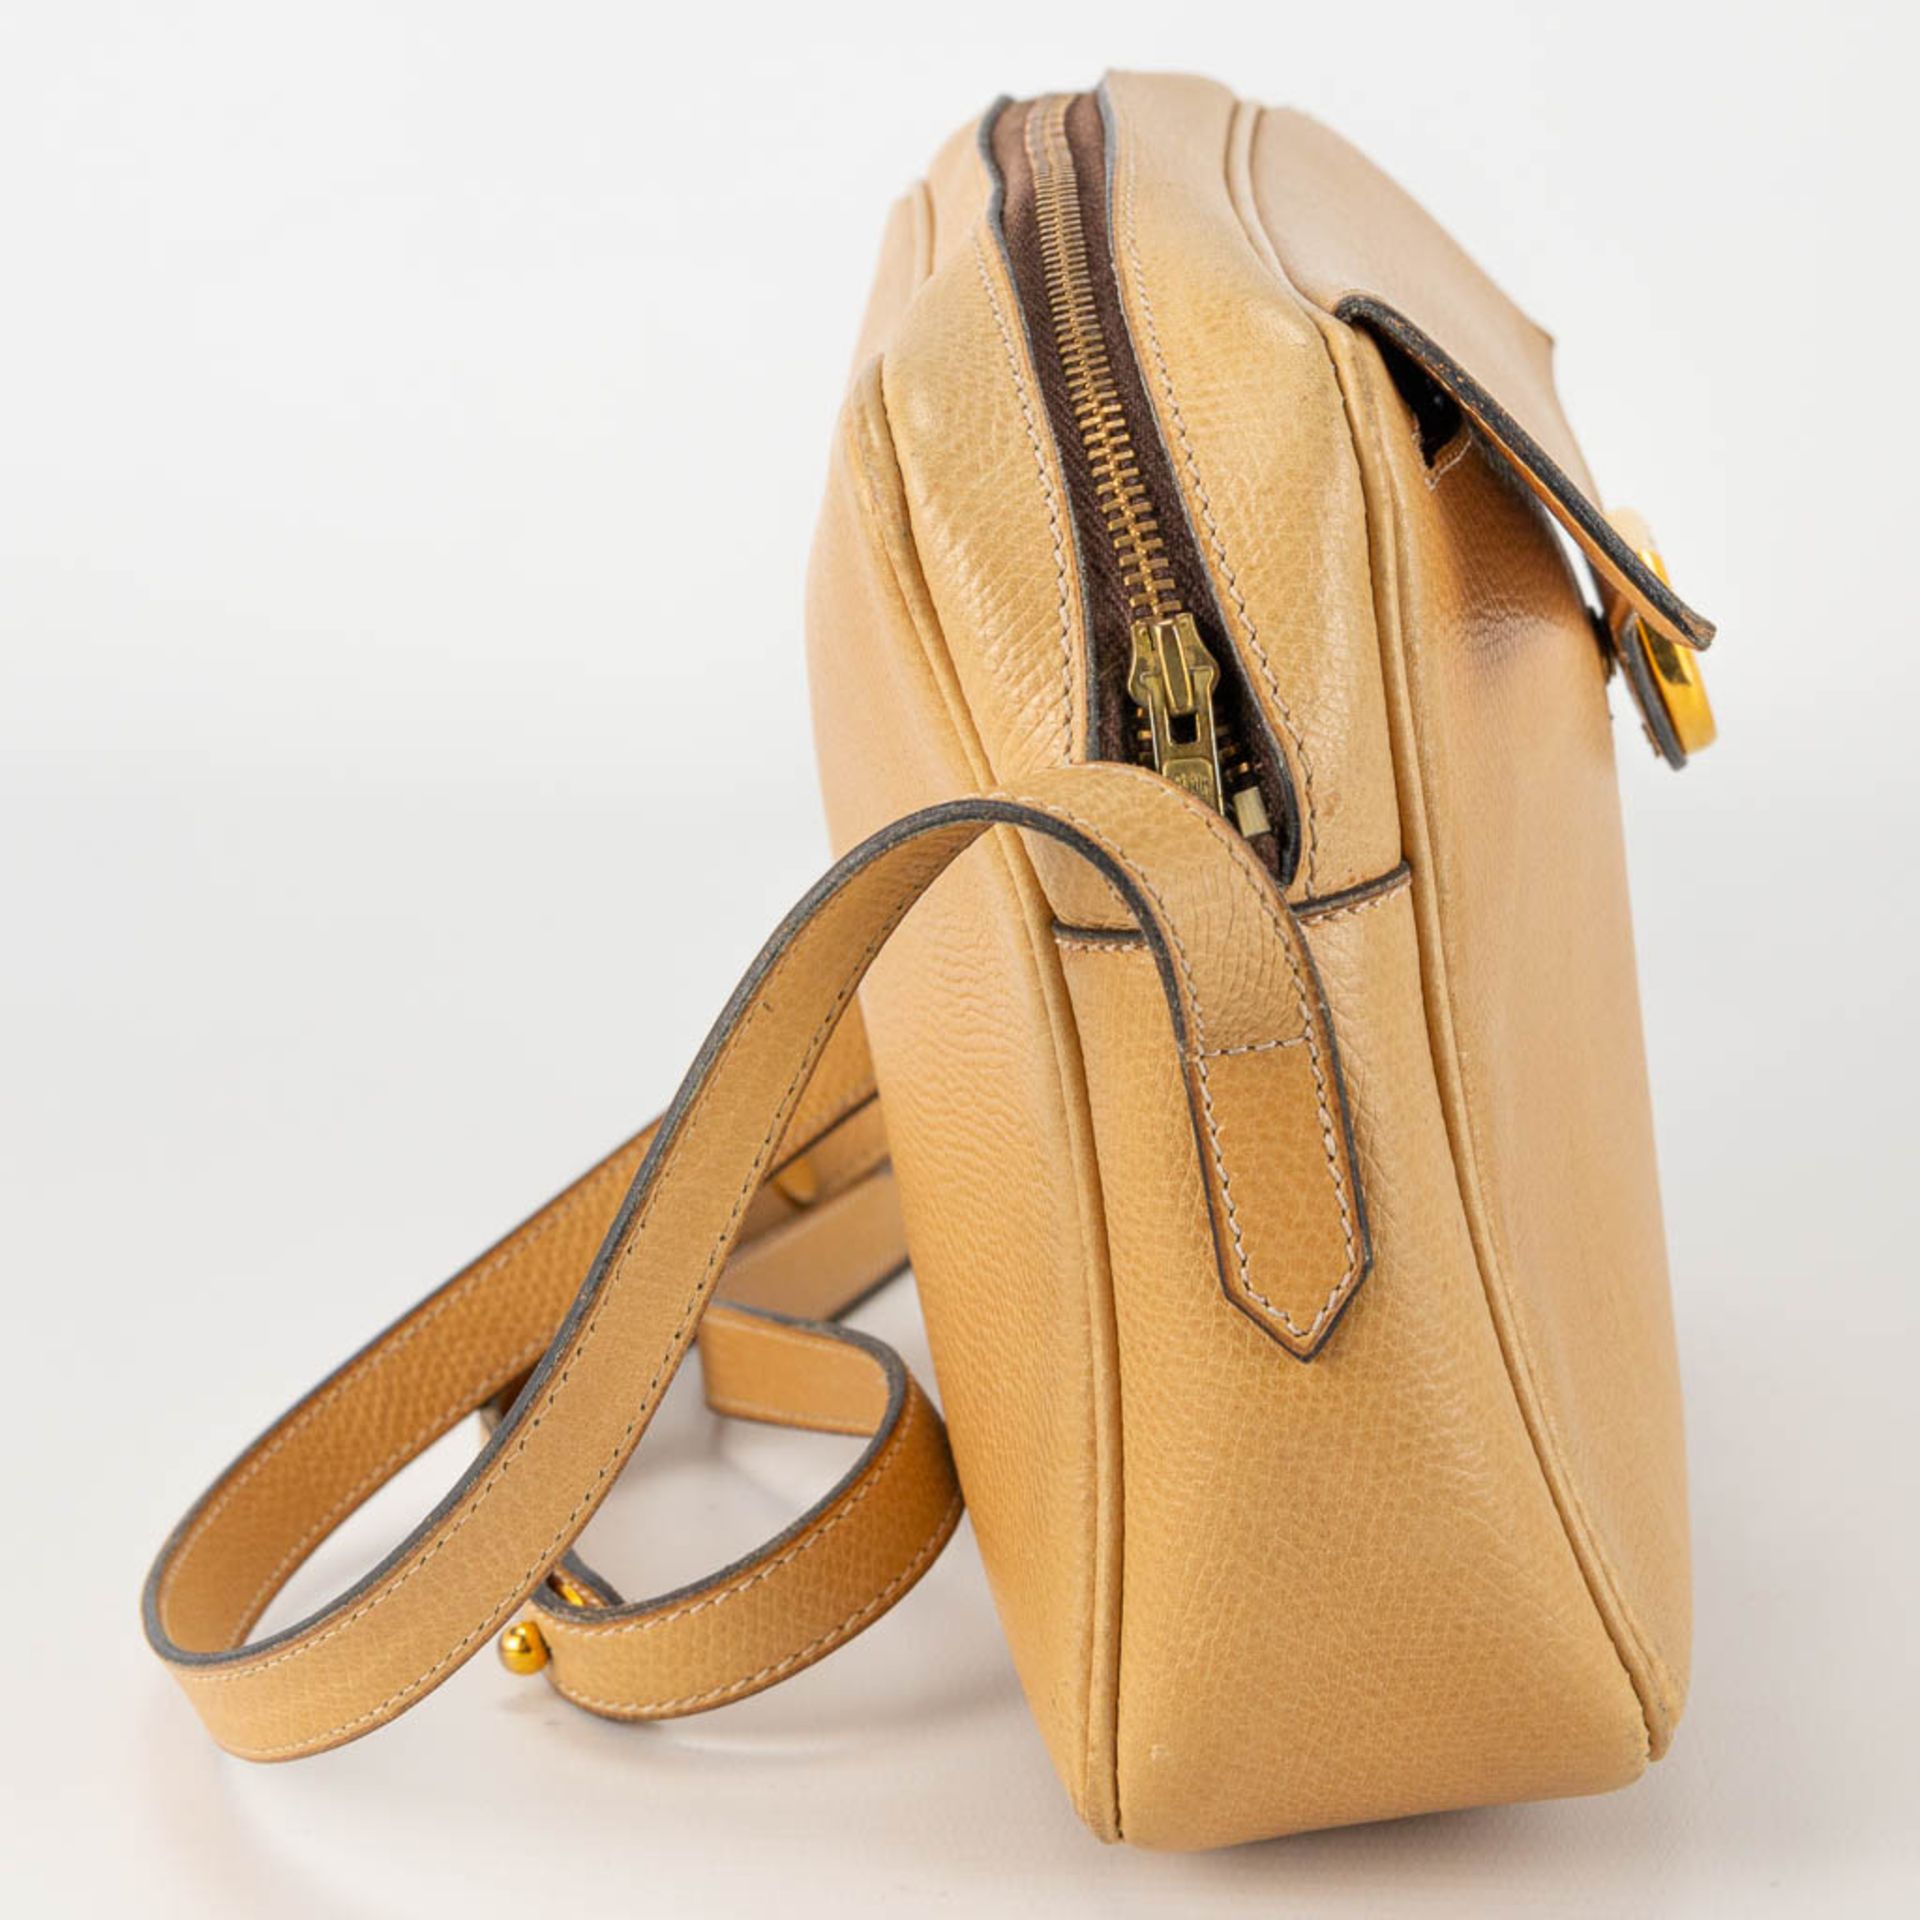 A purse made of brown leather and marked Delvaux. - Image 6 of 14